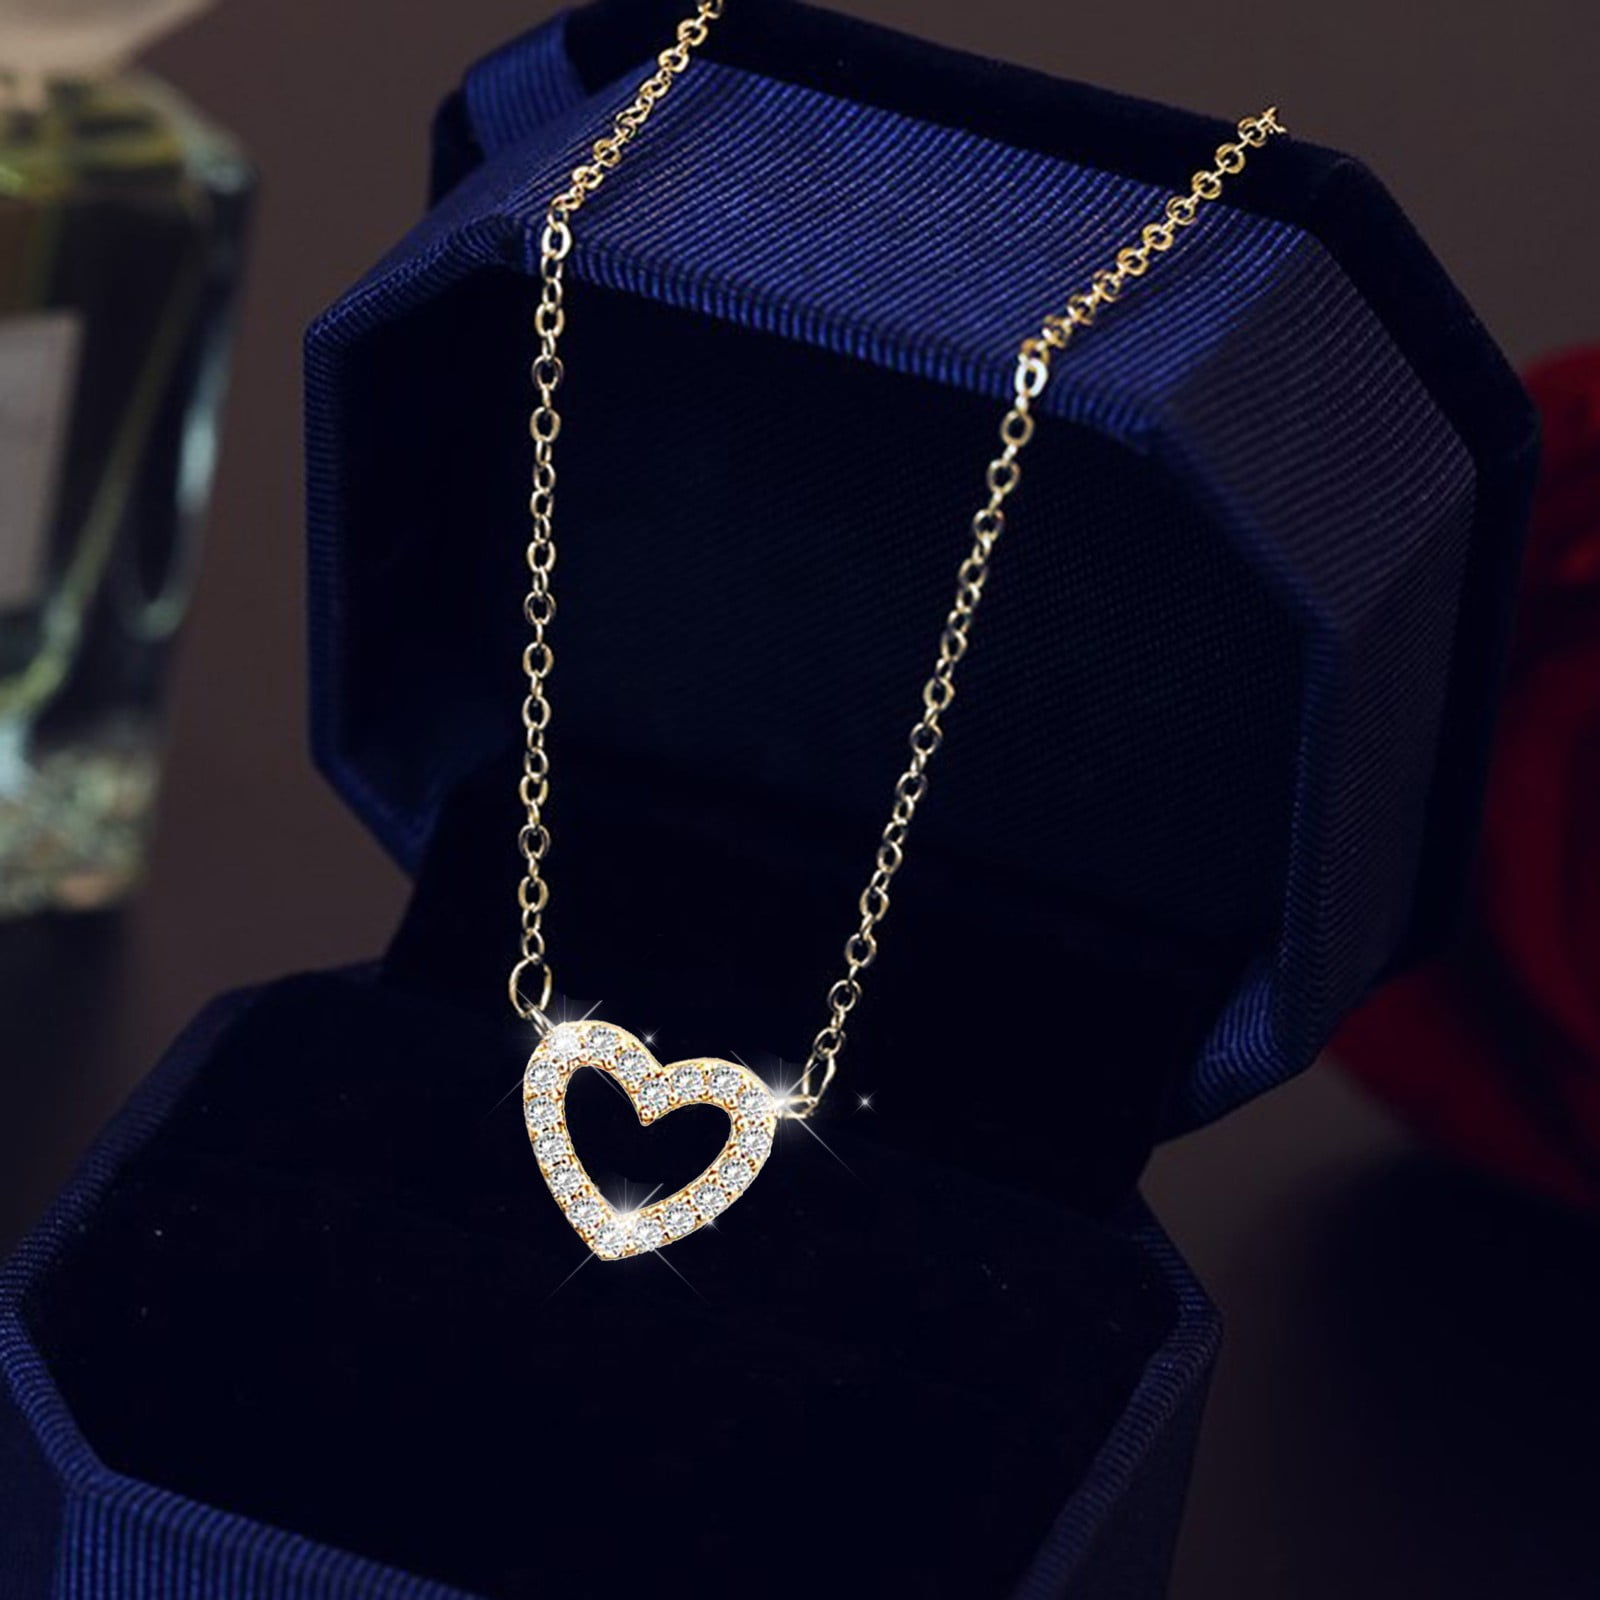 Romantic Arrow Heart Rhinestone Diamond Heart Necklace For Women 316L  Stainless Steel, Perfect Gift For Her From Fashionstore666, $2.5 |  DHgate.Com